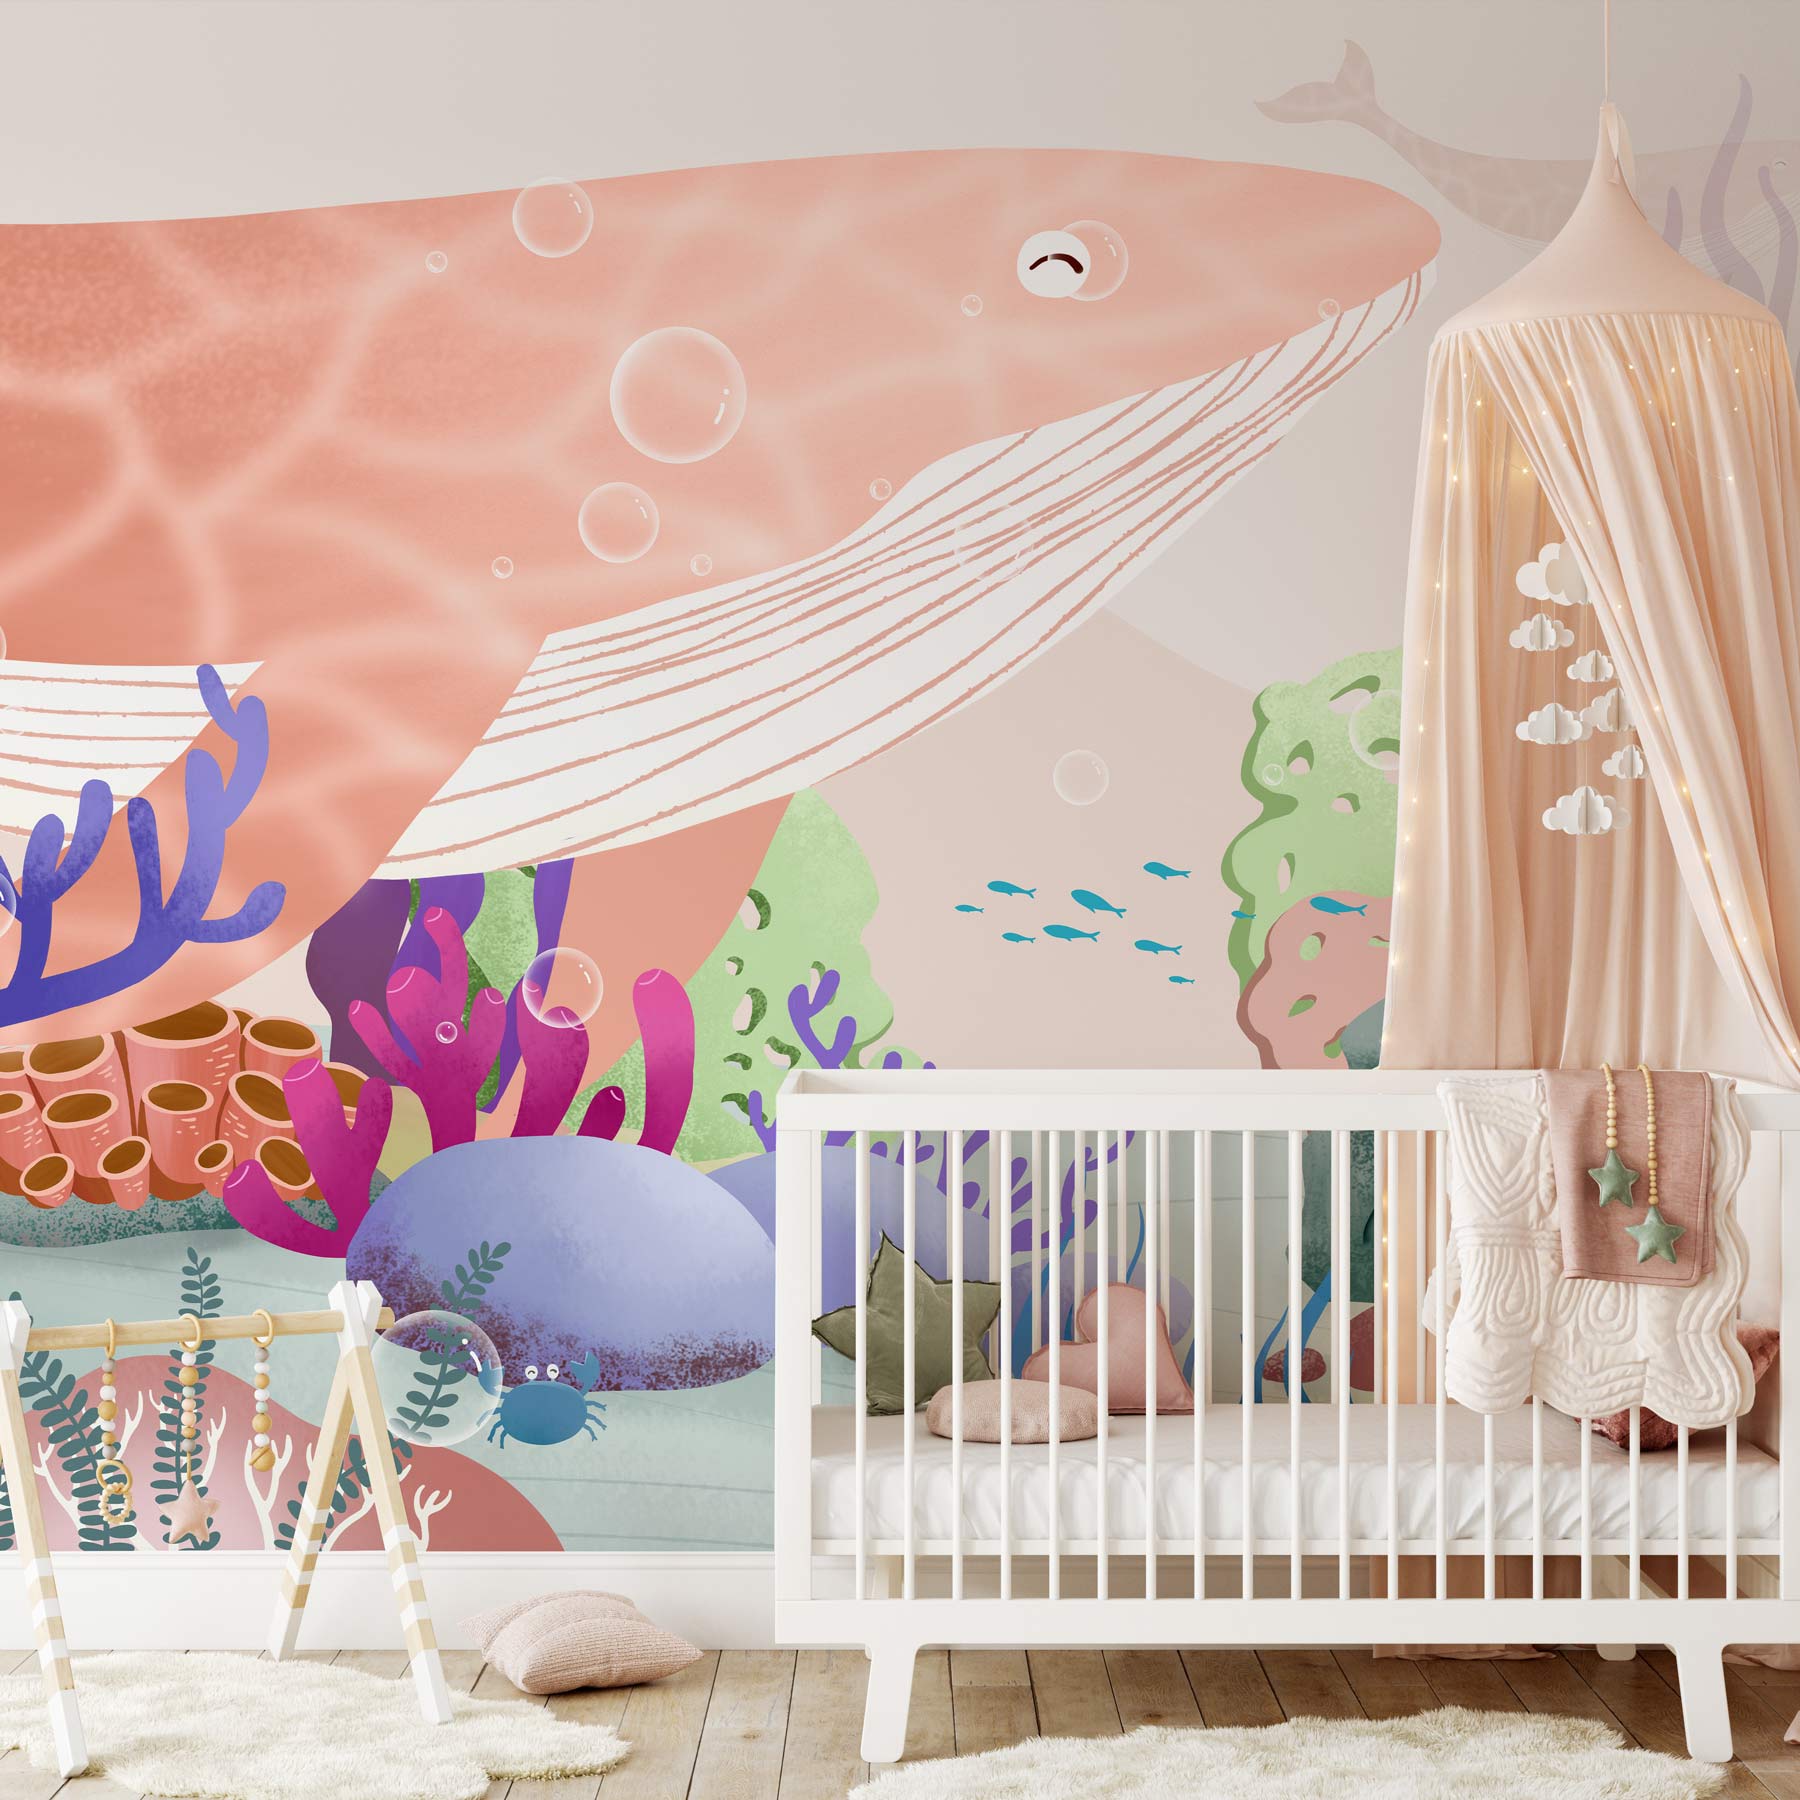 Wallpaper Mural Featuring Seabed Animals for Use in Decorating Children's Rooms